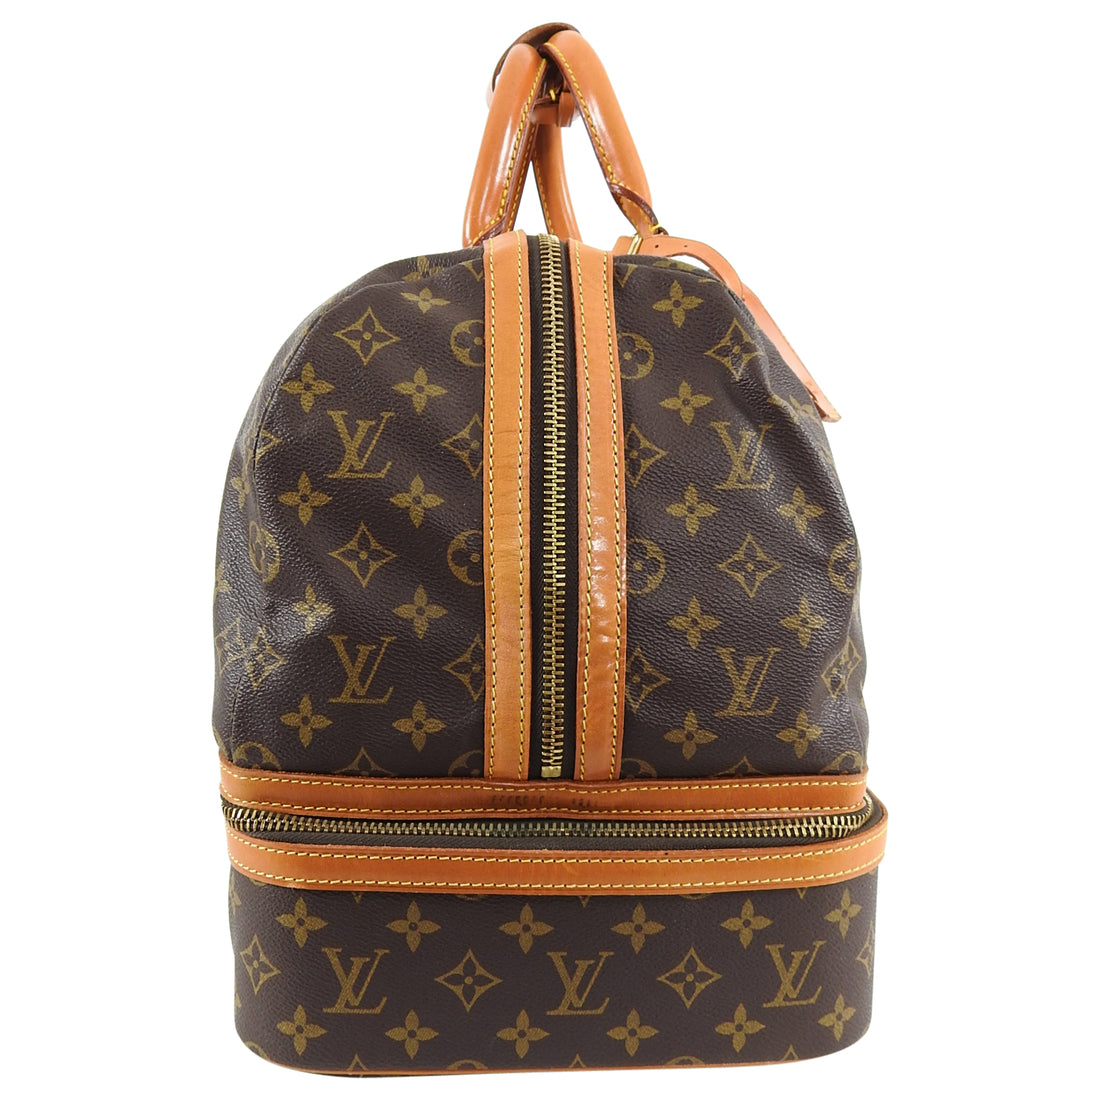 Louis Vuitton Duffle Bags - 87 For Sale on 1stDibs  fake louis vuitton  duffle bag, price of louis vuitton duffle bag, lv duffle bag